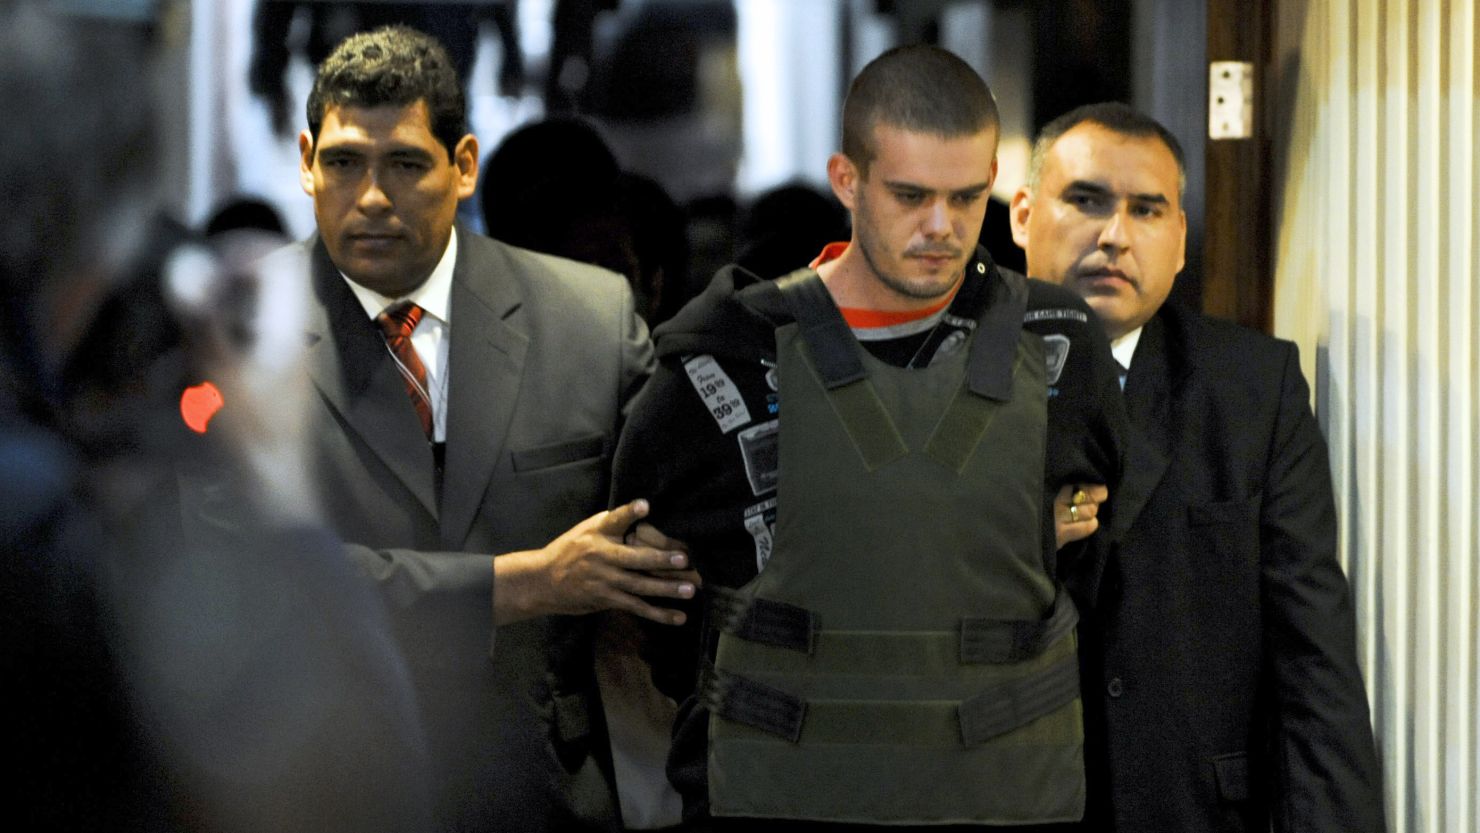 Joran van der Sloot was arrested in June 2010 in Stephany Flores' death but  was not formally charged until this month.